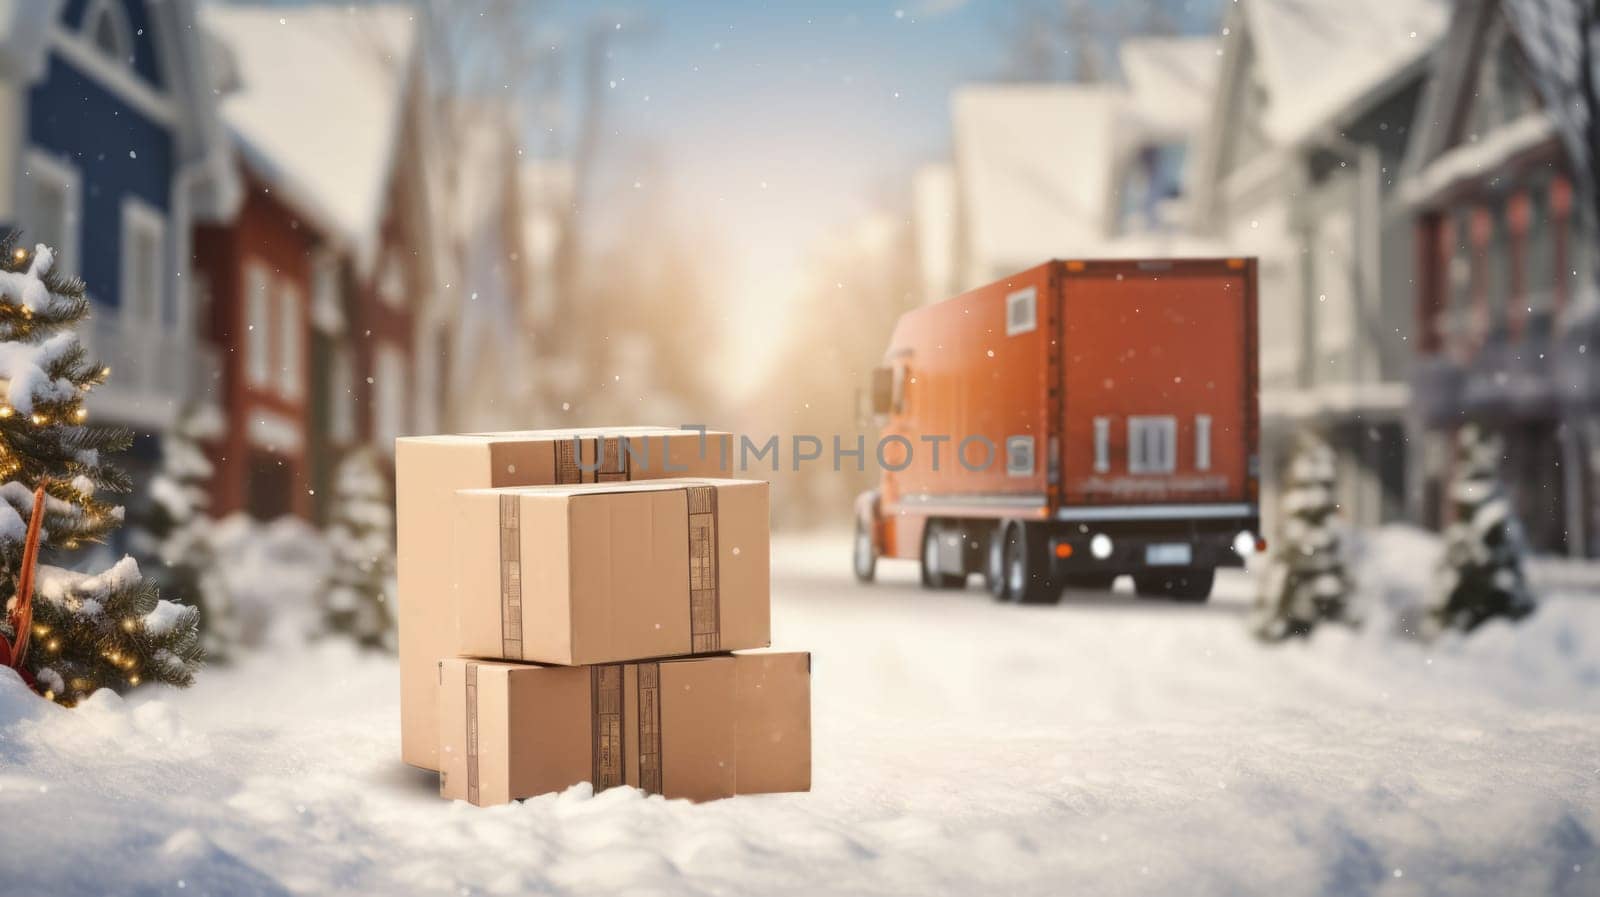 Delivered parcel box on door mat near winter snow entrance. Christmas online shopping. Black Friday sale. by JuliaDorian